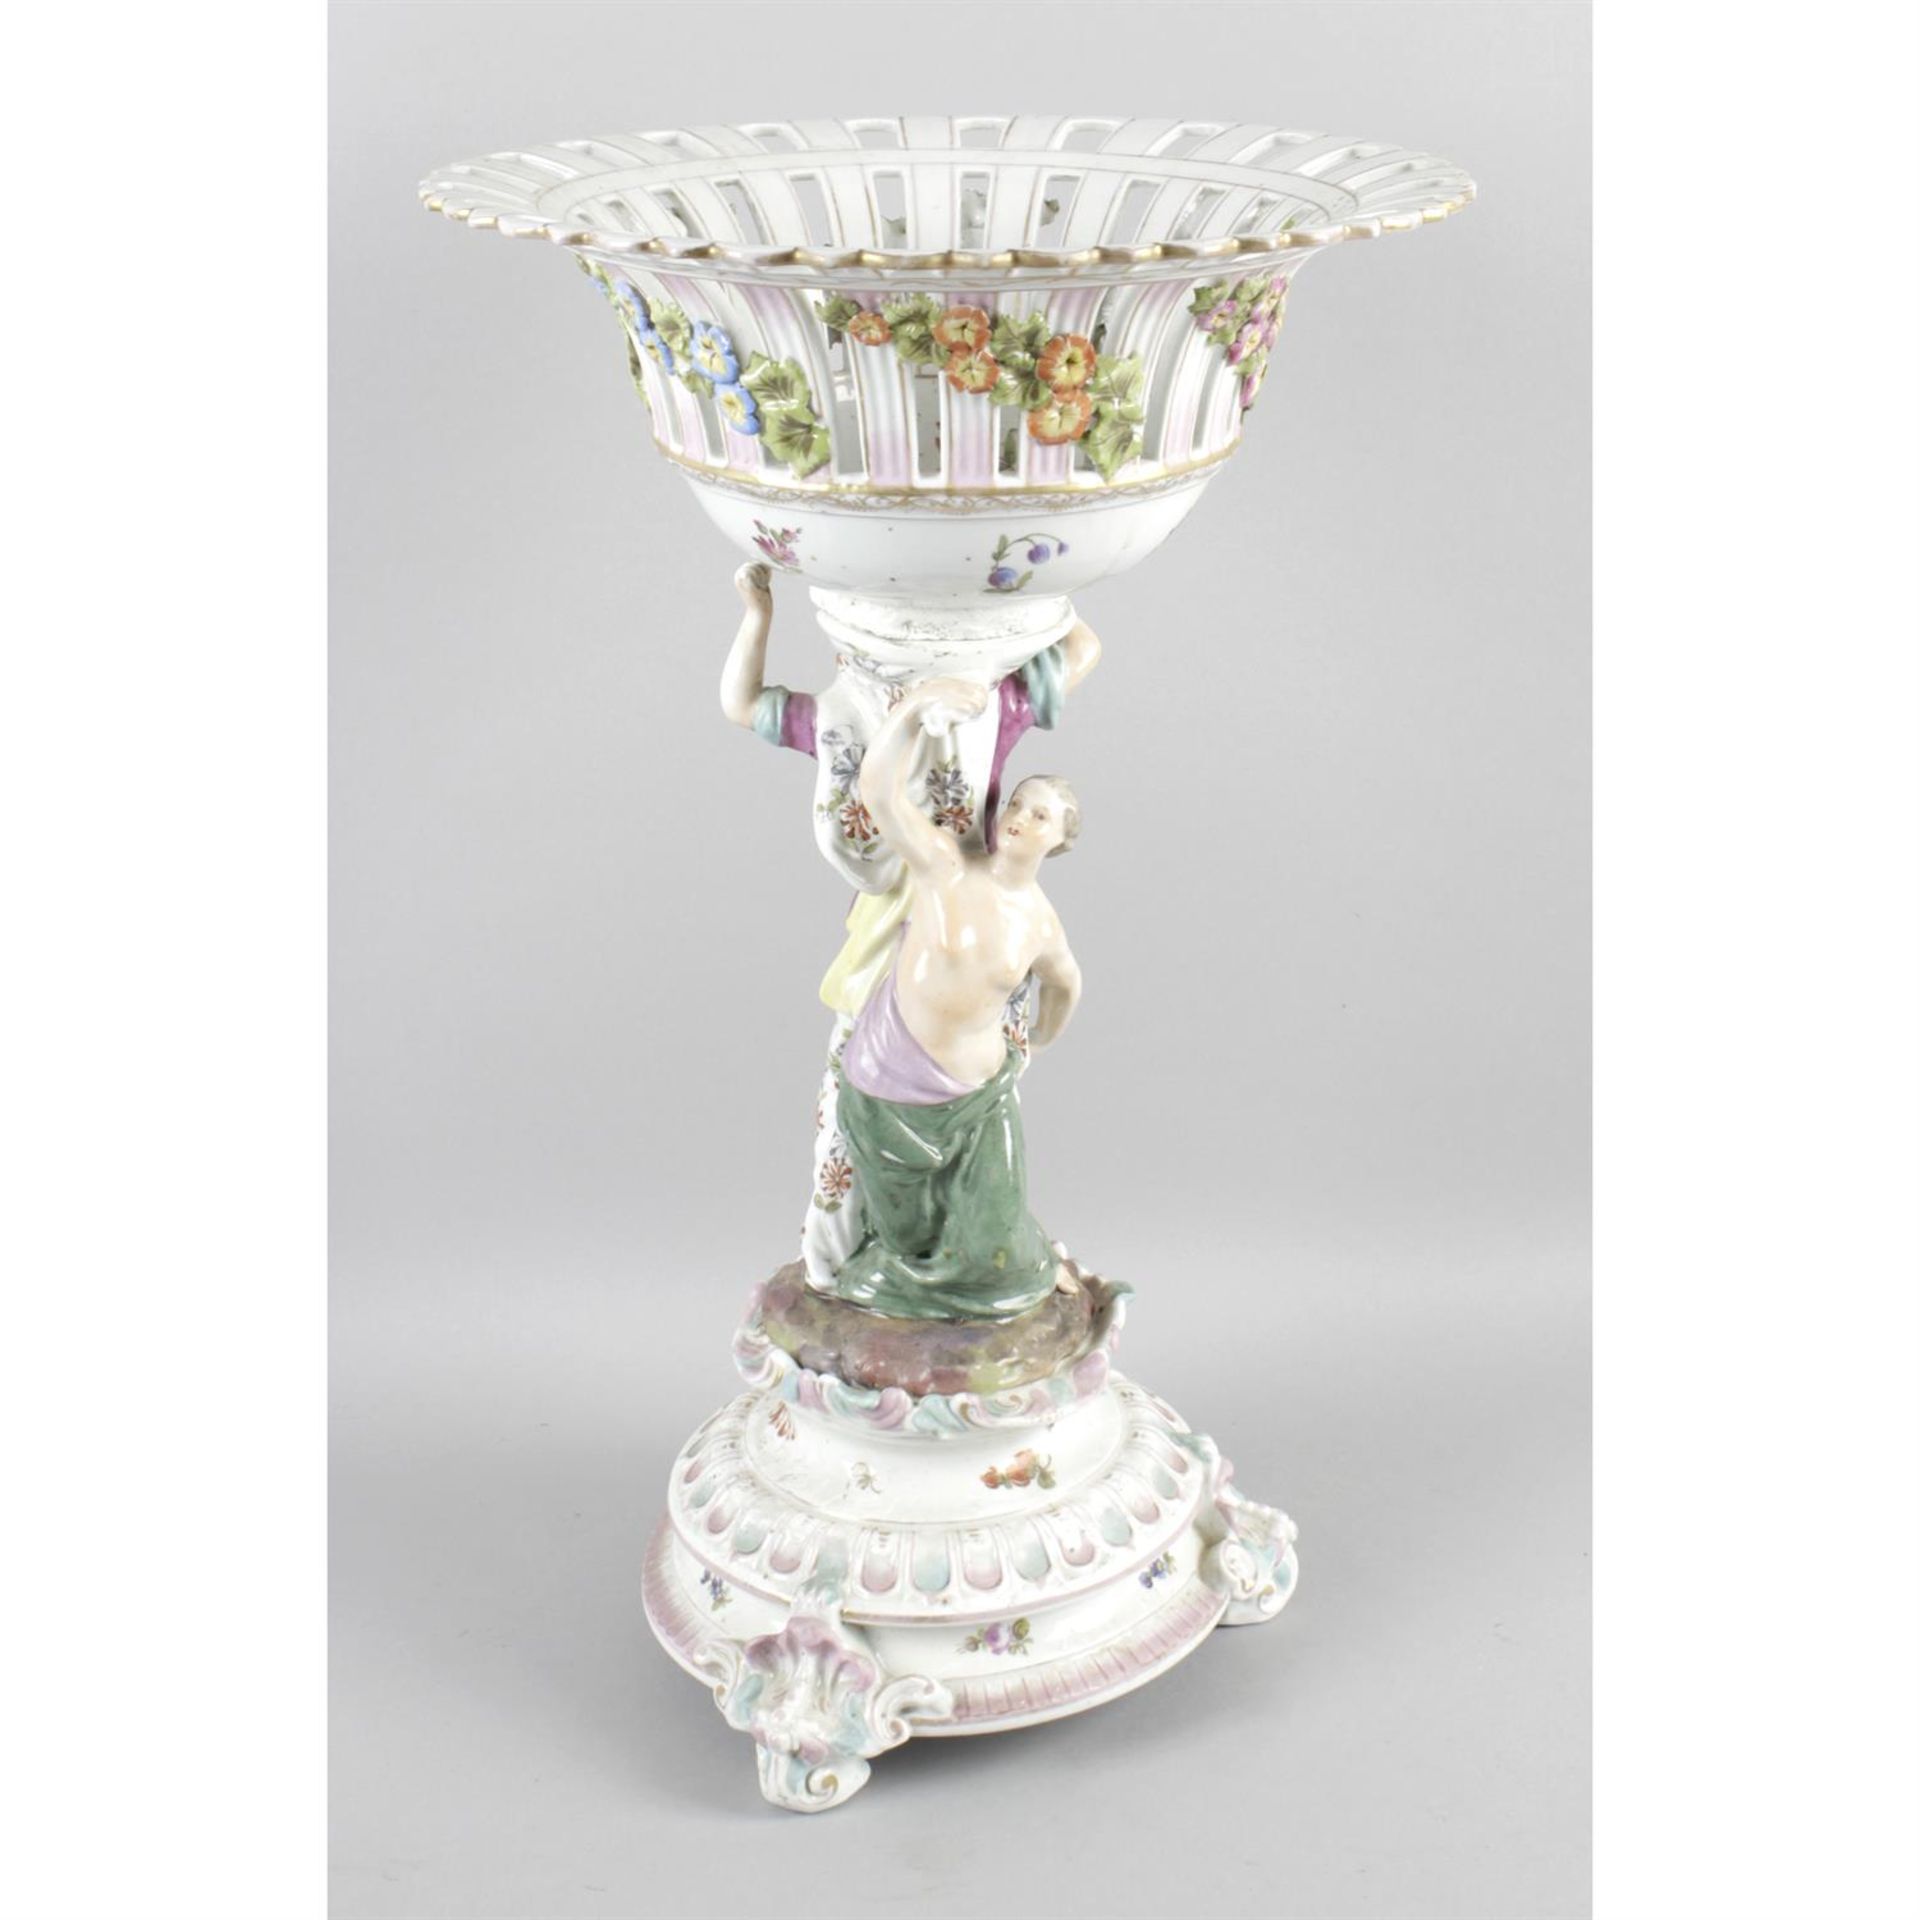 A late 19th century Continental porcelain table centre piece.